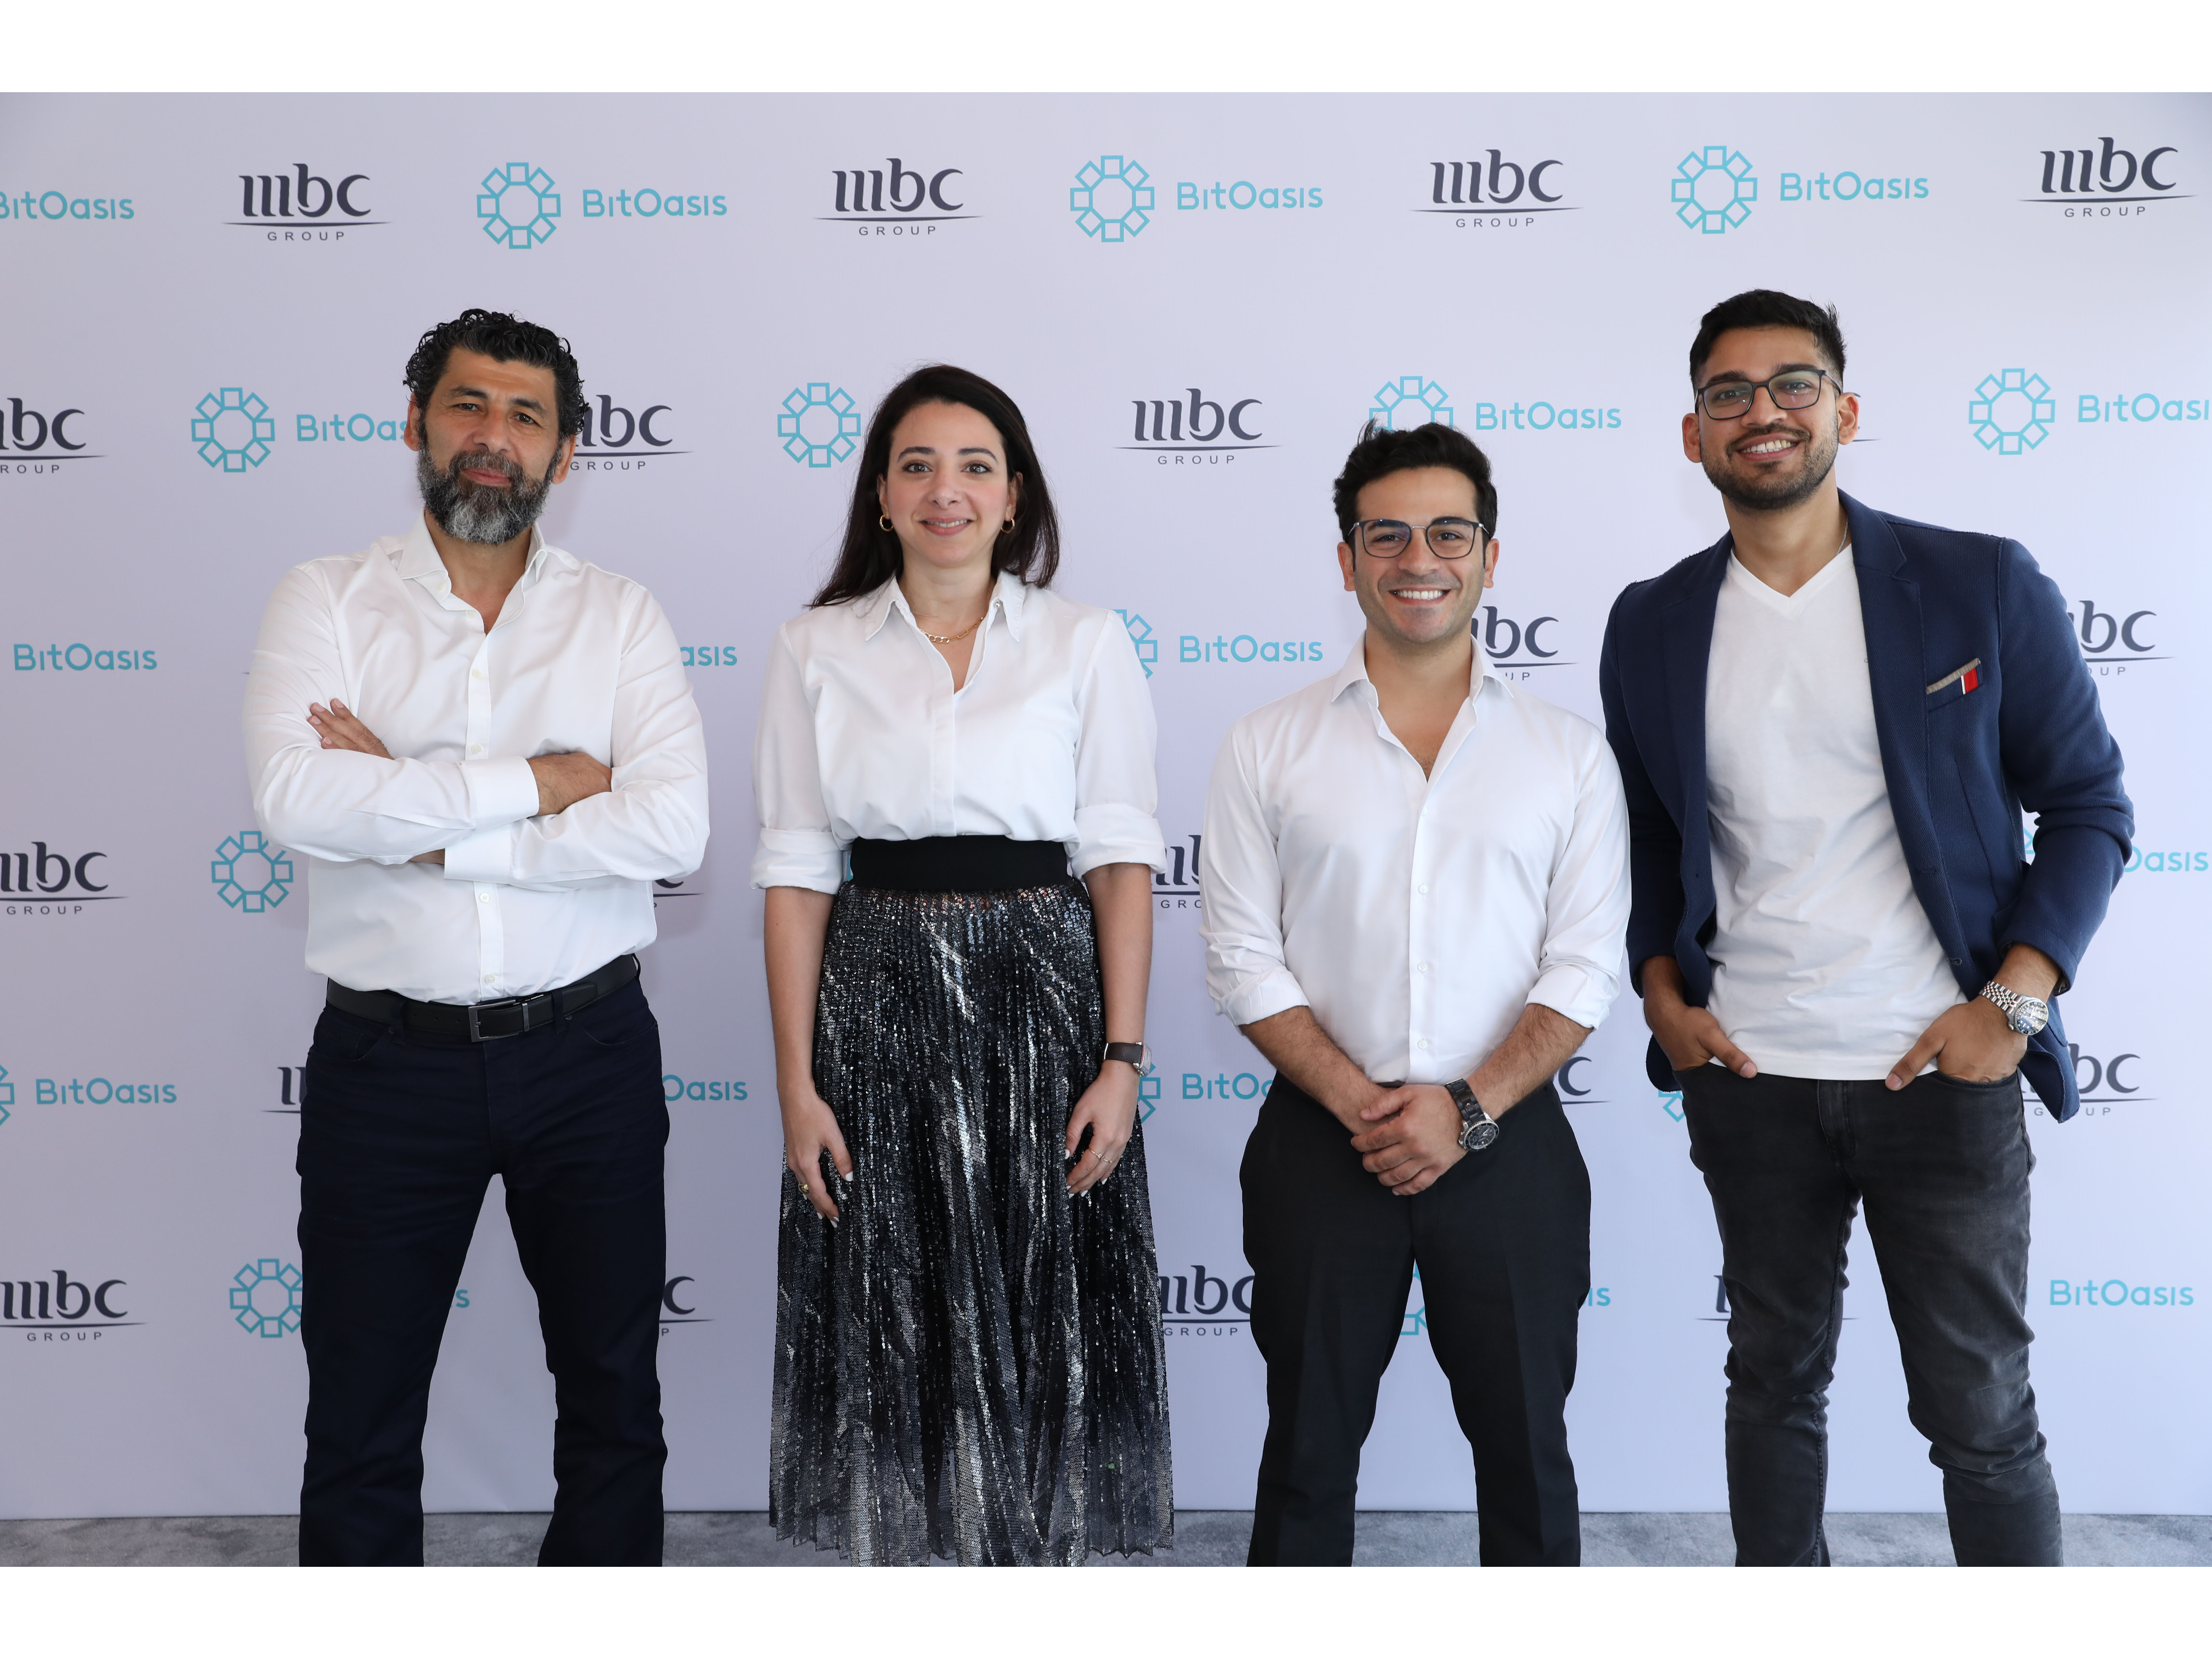 MBC GROUP and BitOasis announce strategic partnership to launch crypto educational drive across MENA